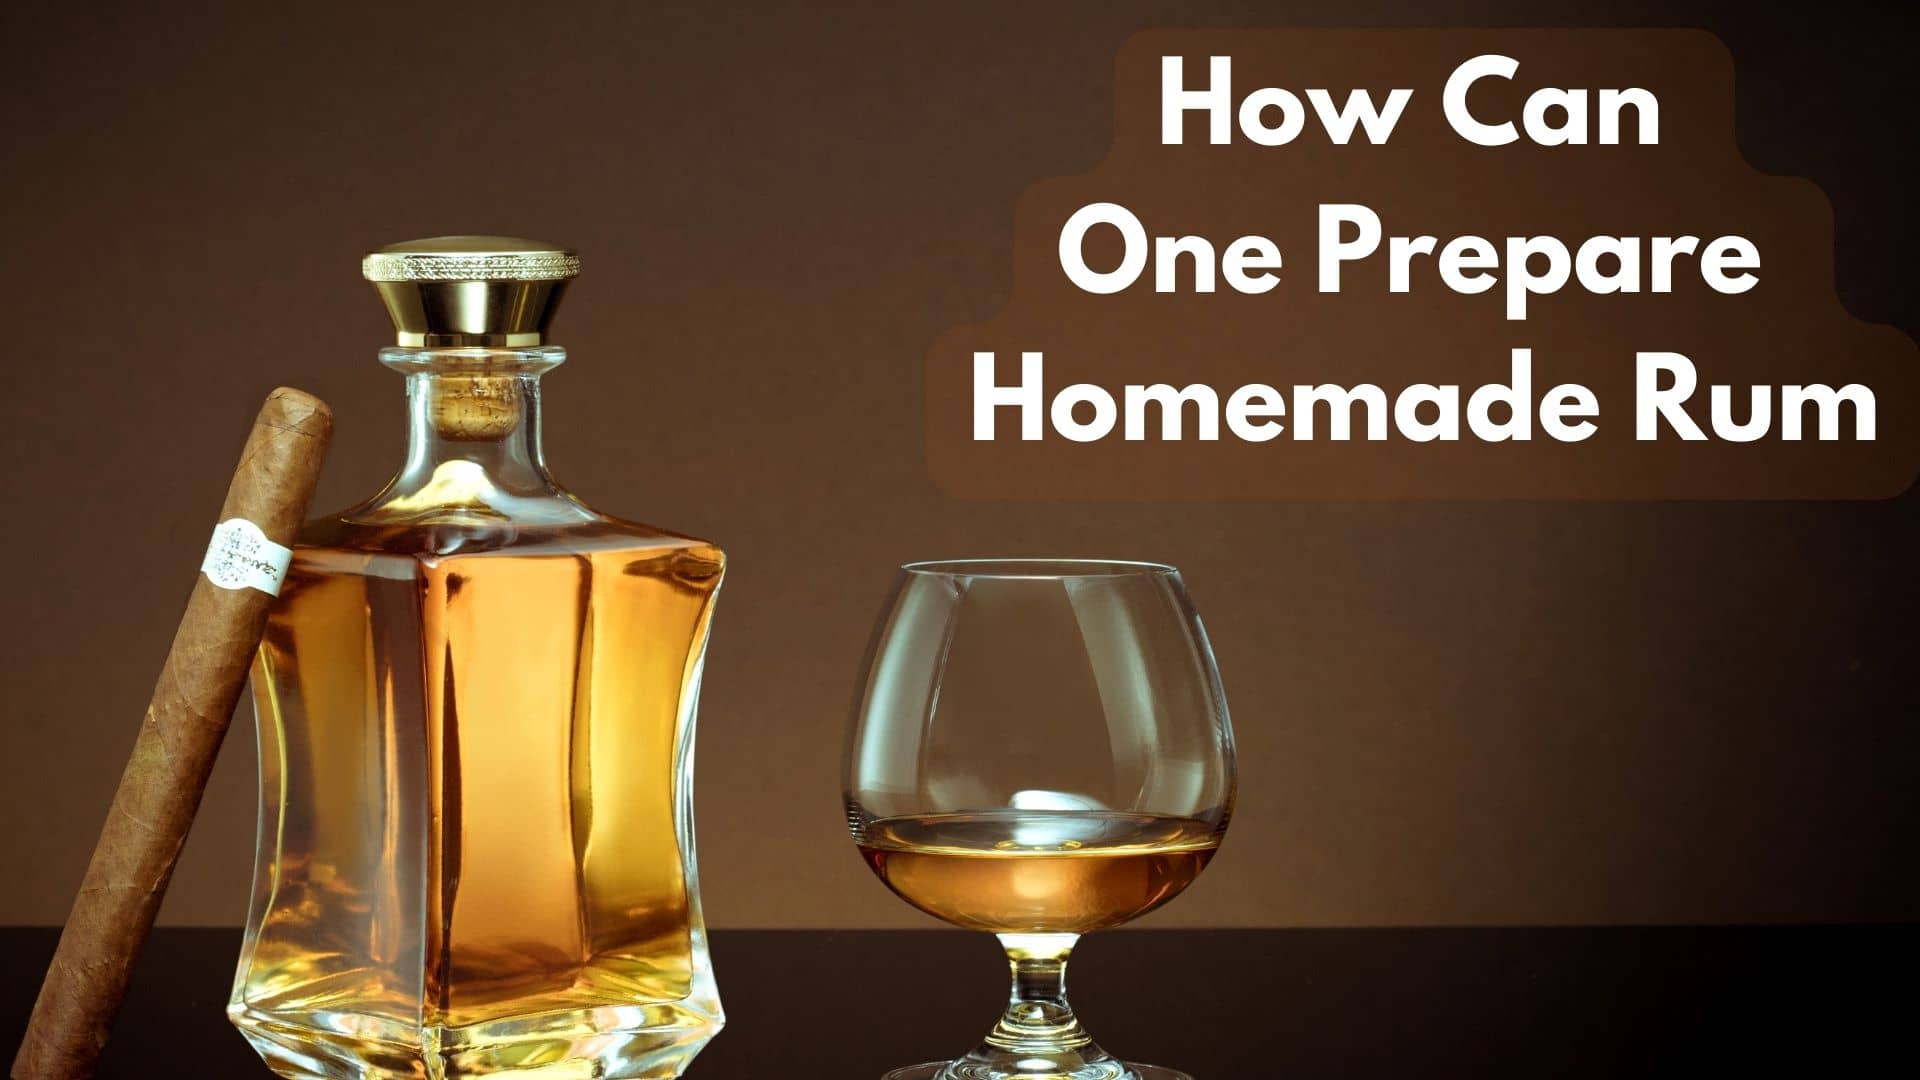 How Can One Prepare Homemade Rum